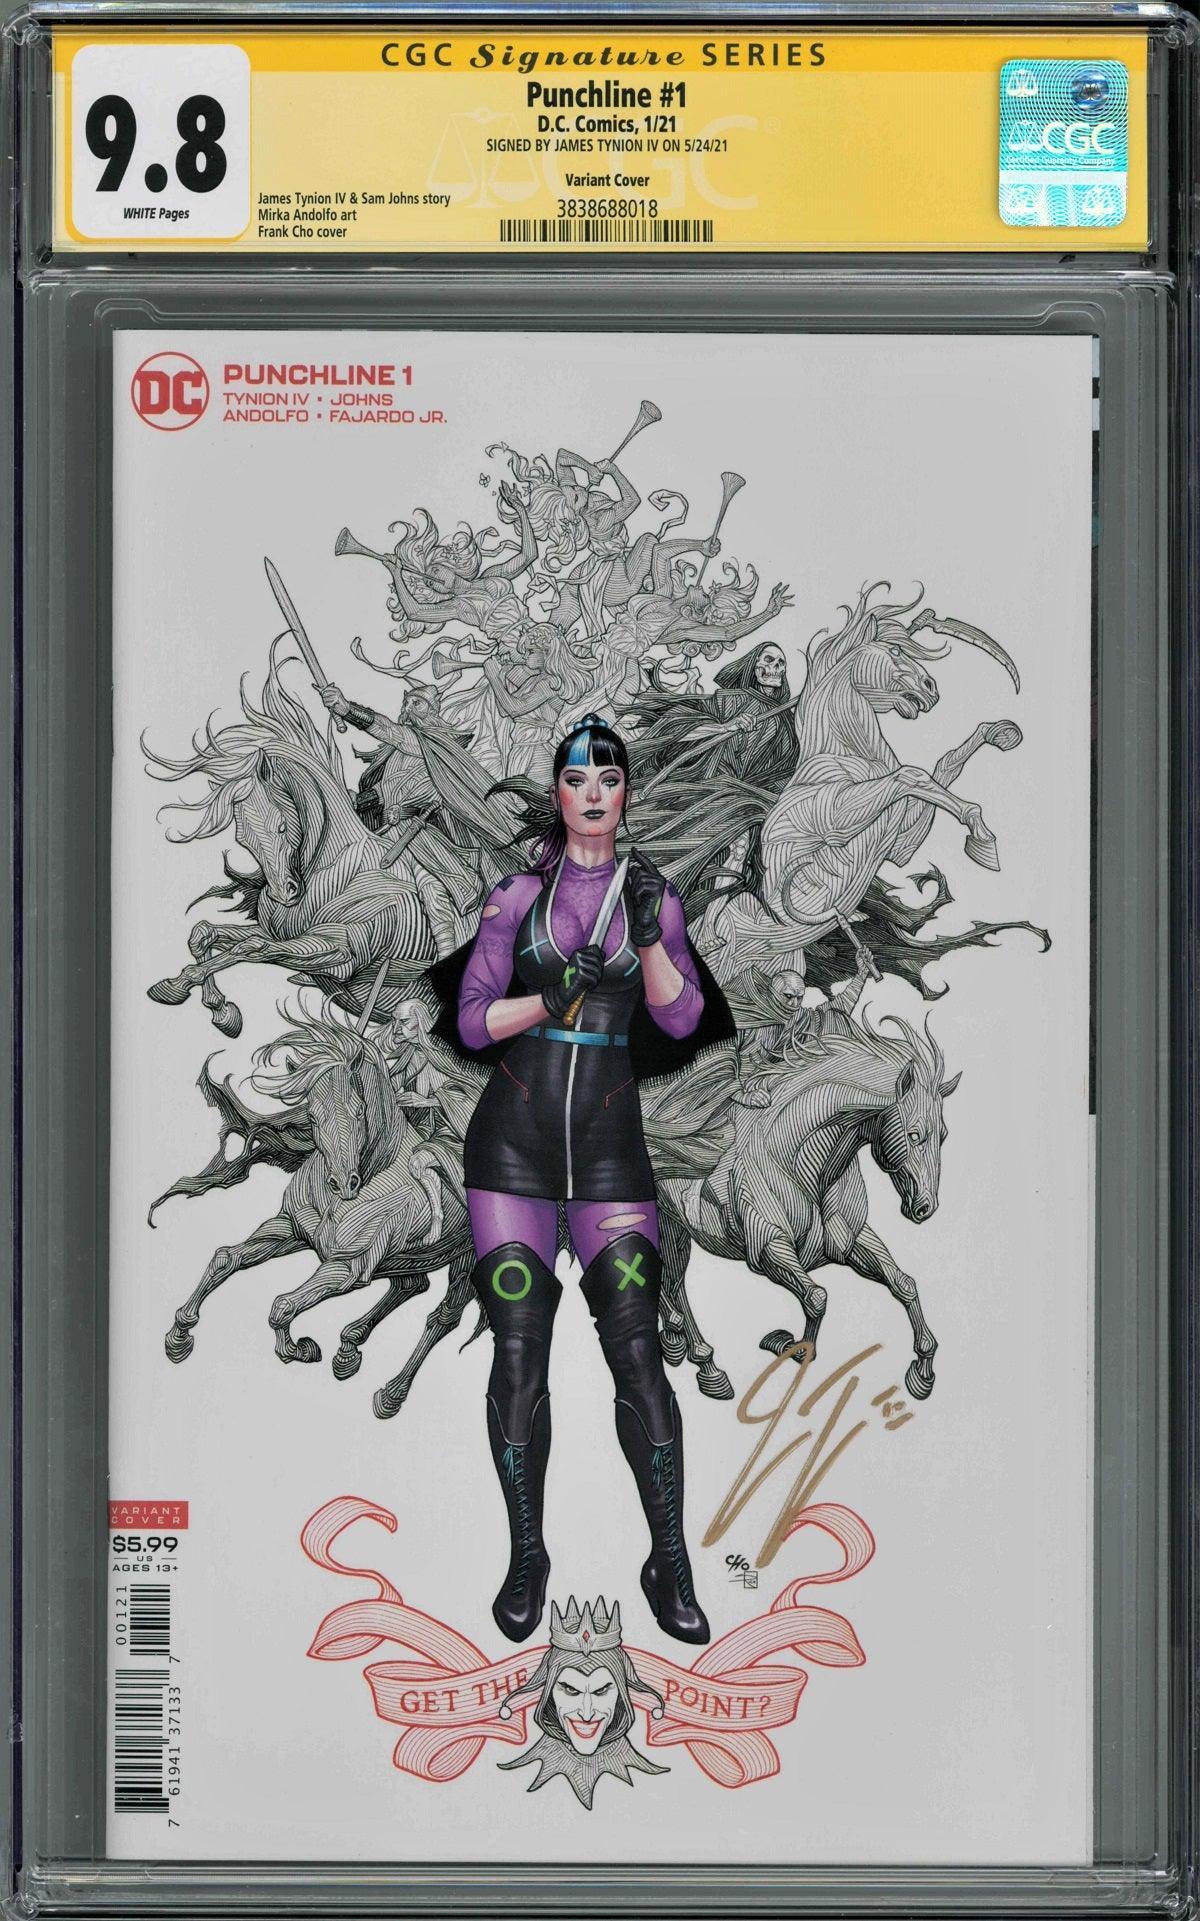 CGC PUNCHLINE #1 VARIANT COVER (9.8) SIGNATURE SERIES - SIGNED BY JAMES TYNION IV - Kings Comics